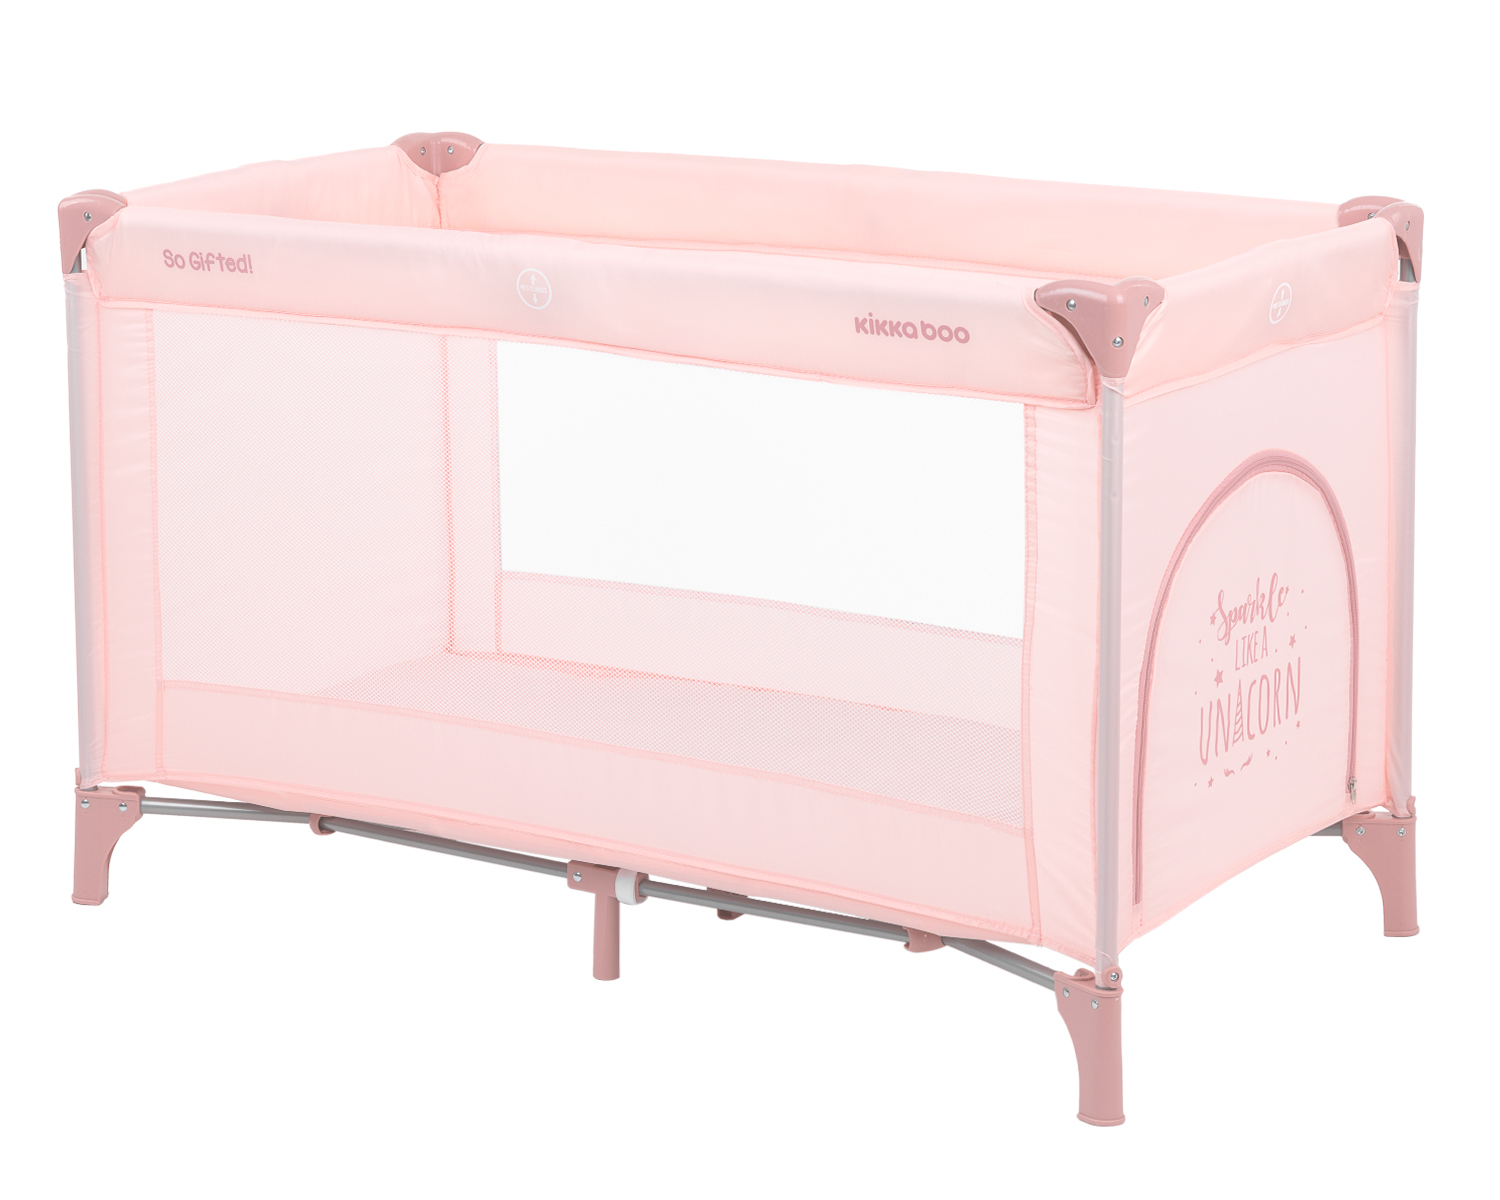 sogifted_playpen_pink_front_1lvl_3-4_b2b